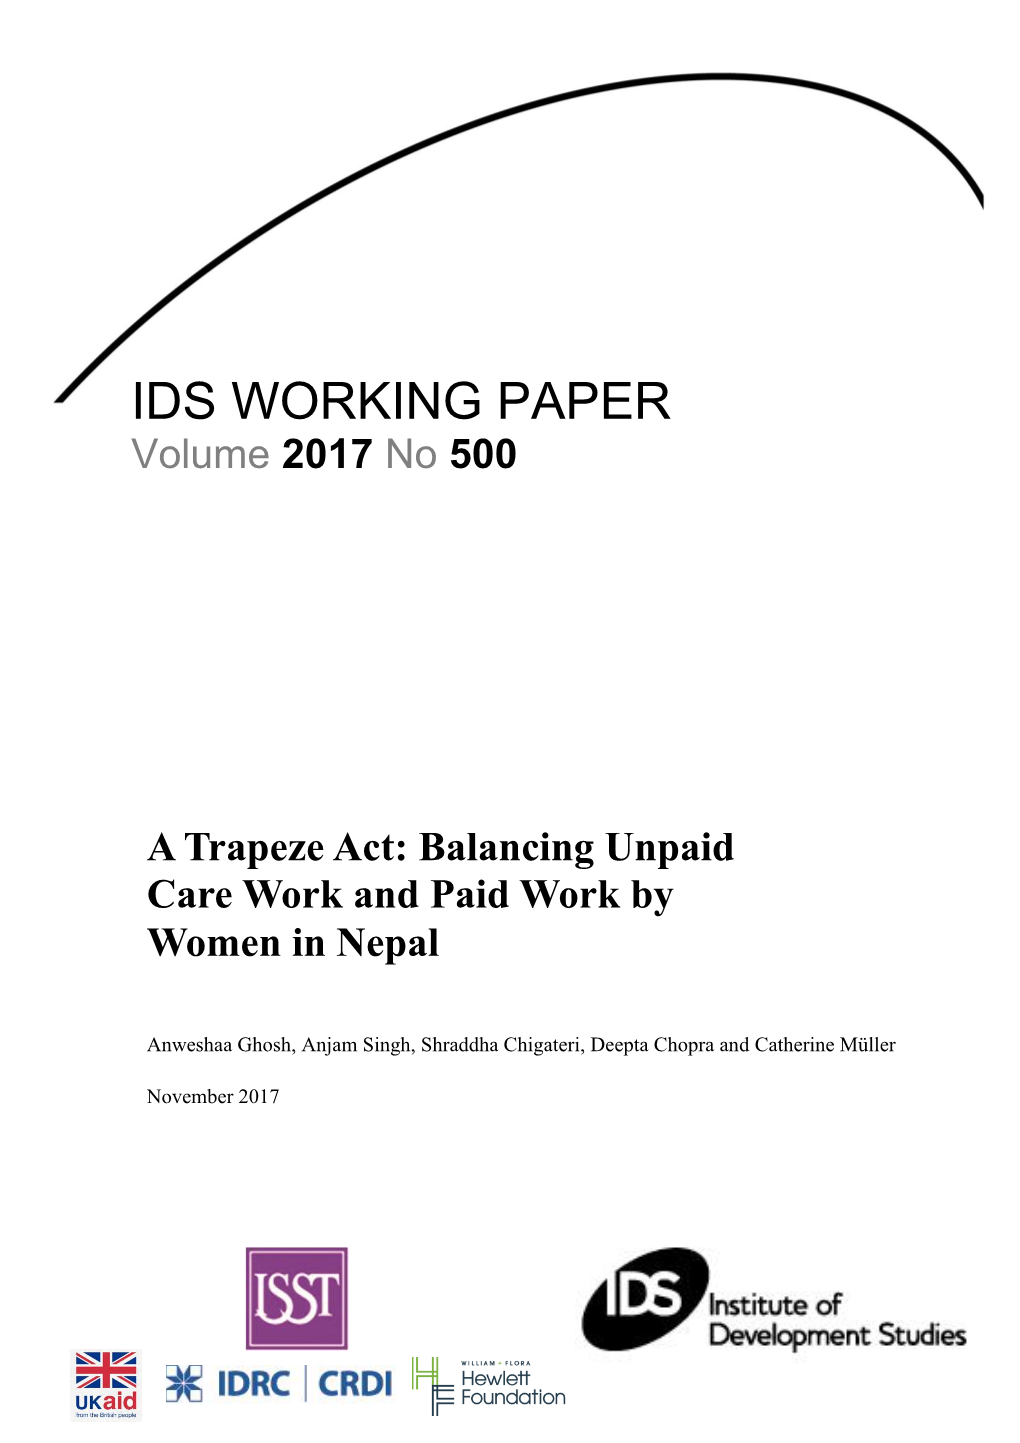 Ids Working Paper